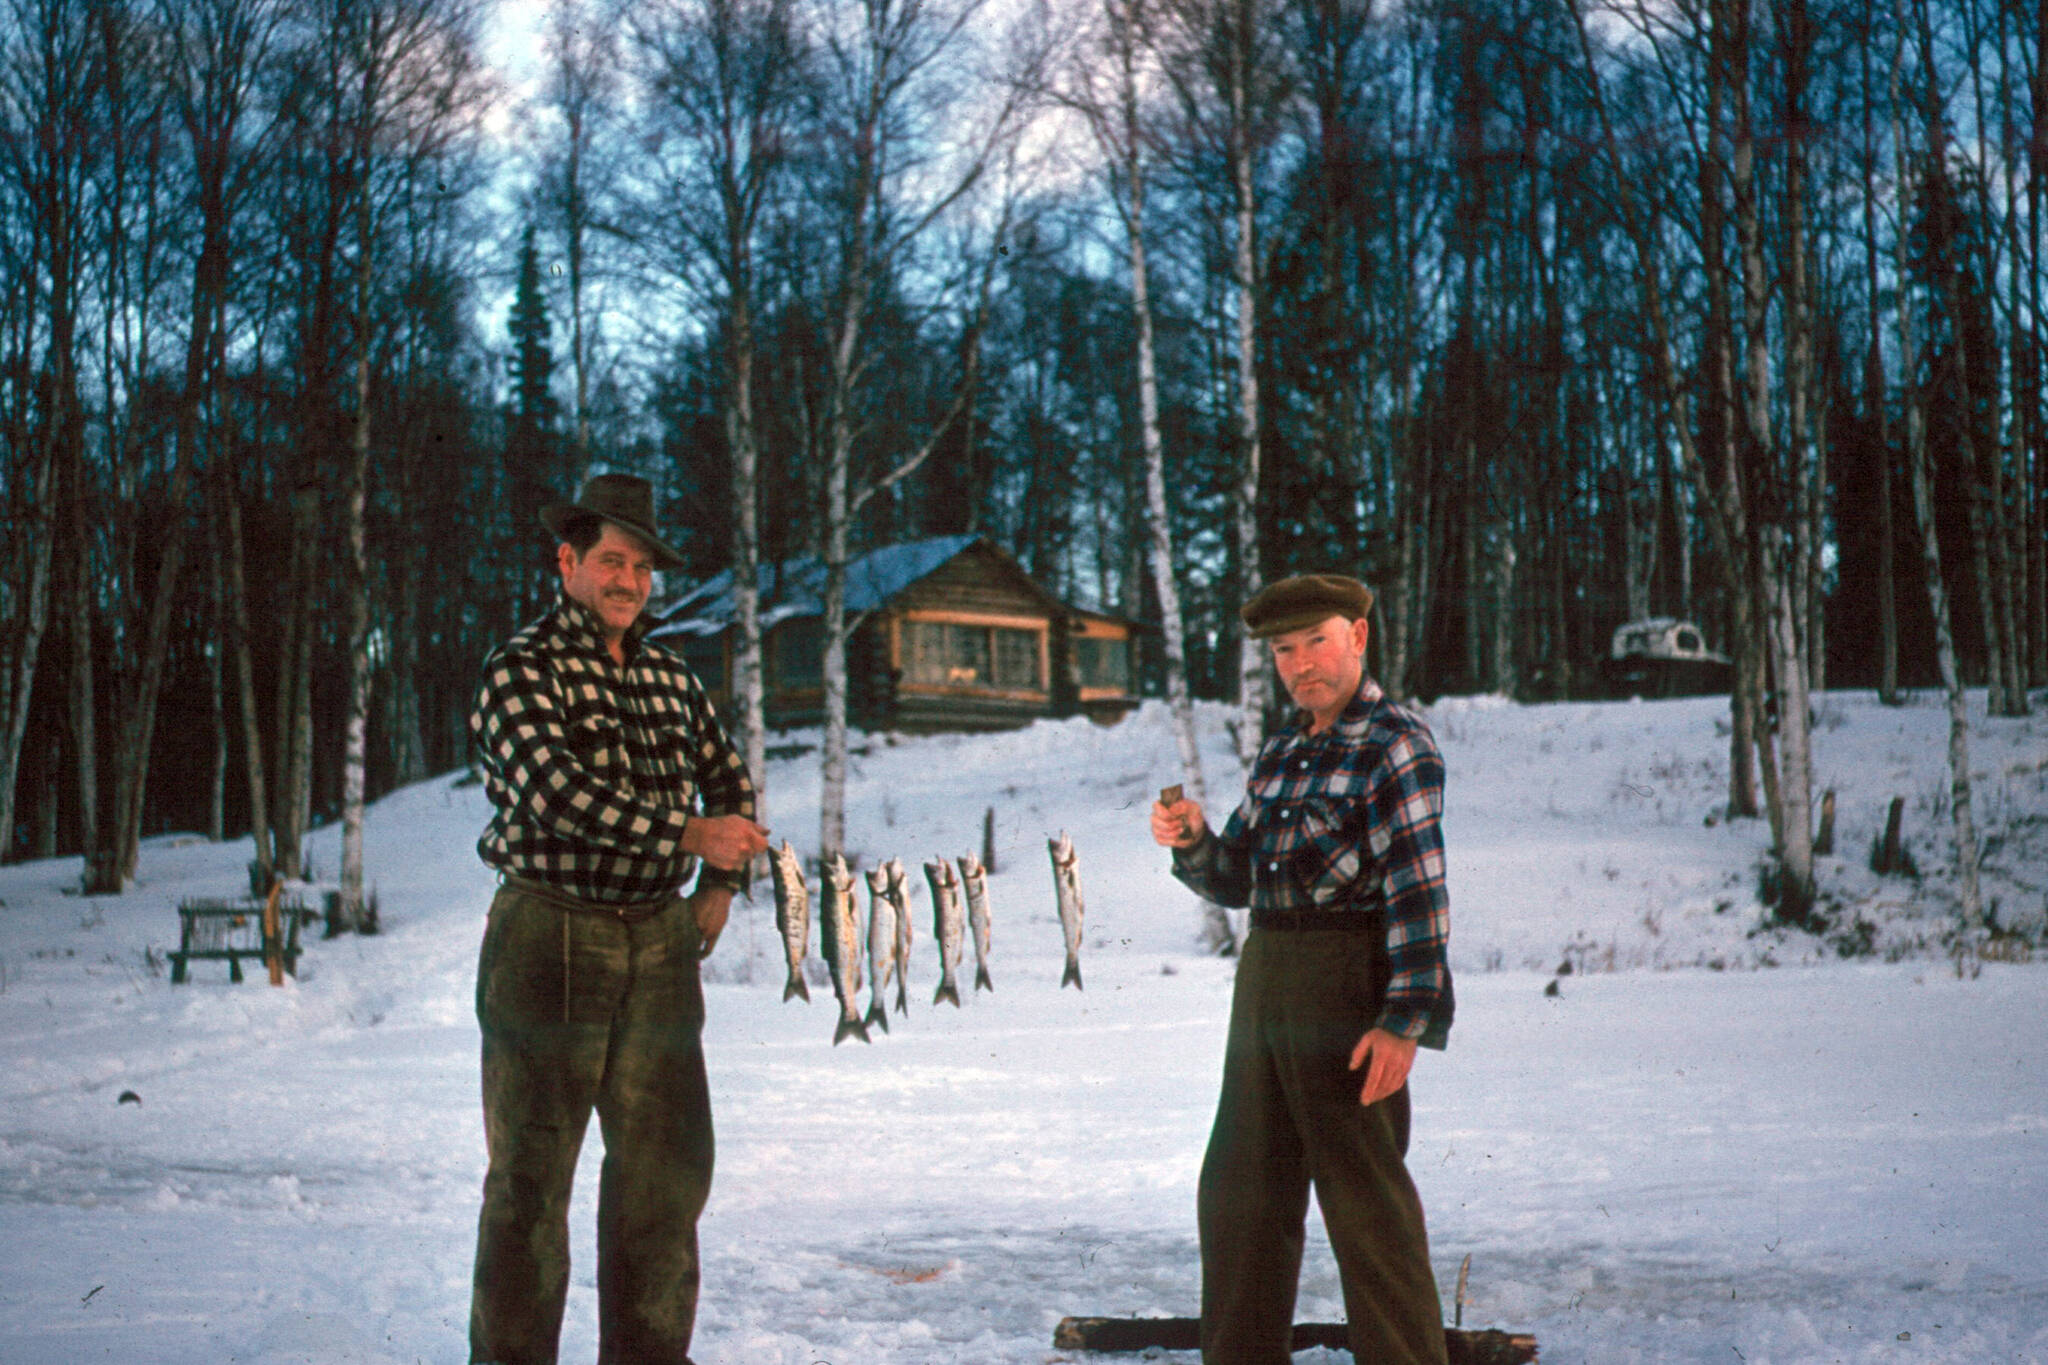 In this 1950s image, Chell Bear (left) and Lawrence McGuire display a stringer of small trout they caught through the ice in front of the homestead cabin of Bob Mackey, for whom the Mackey Lakes were named. (Photo courtesy of the Kenai Peninsula College Historic Photo Repository)